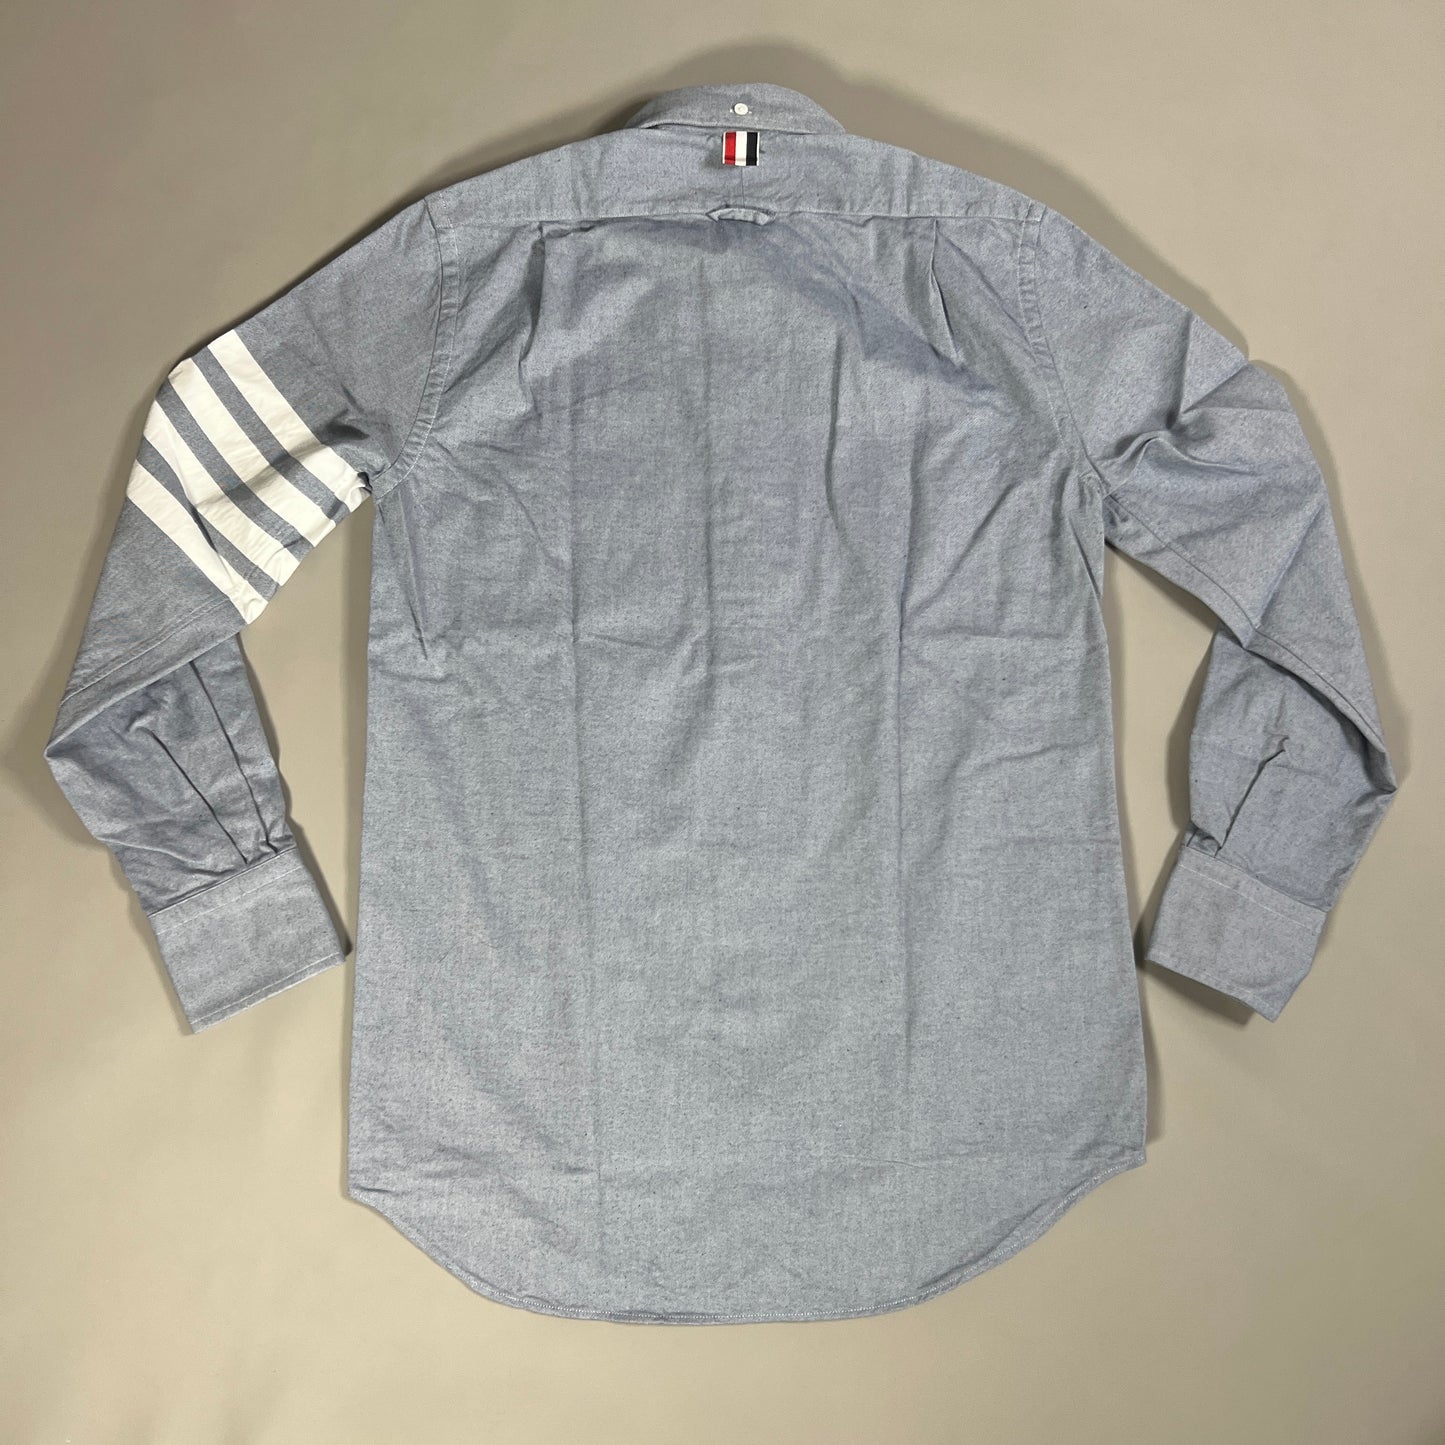 THOM BROWNE Straight Fit BD LS Shirt w/CB RWB GG in Solid Flannel w/woven 4 Bar Stripe in Light Blue Size 0 (NEW)